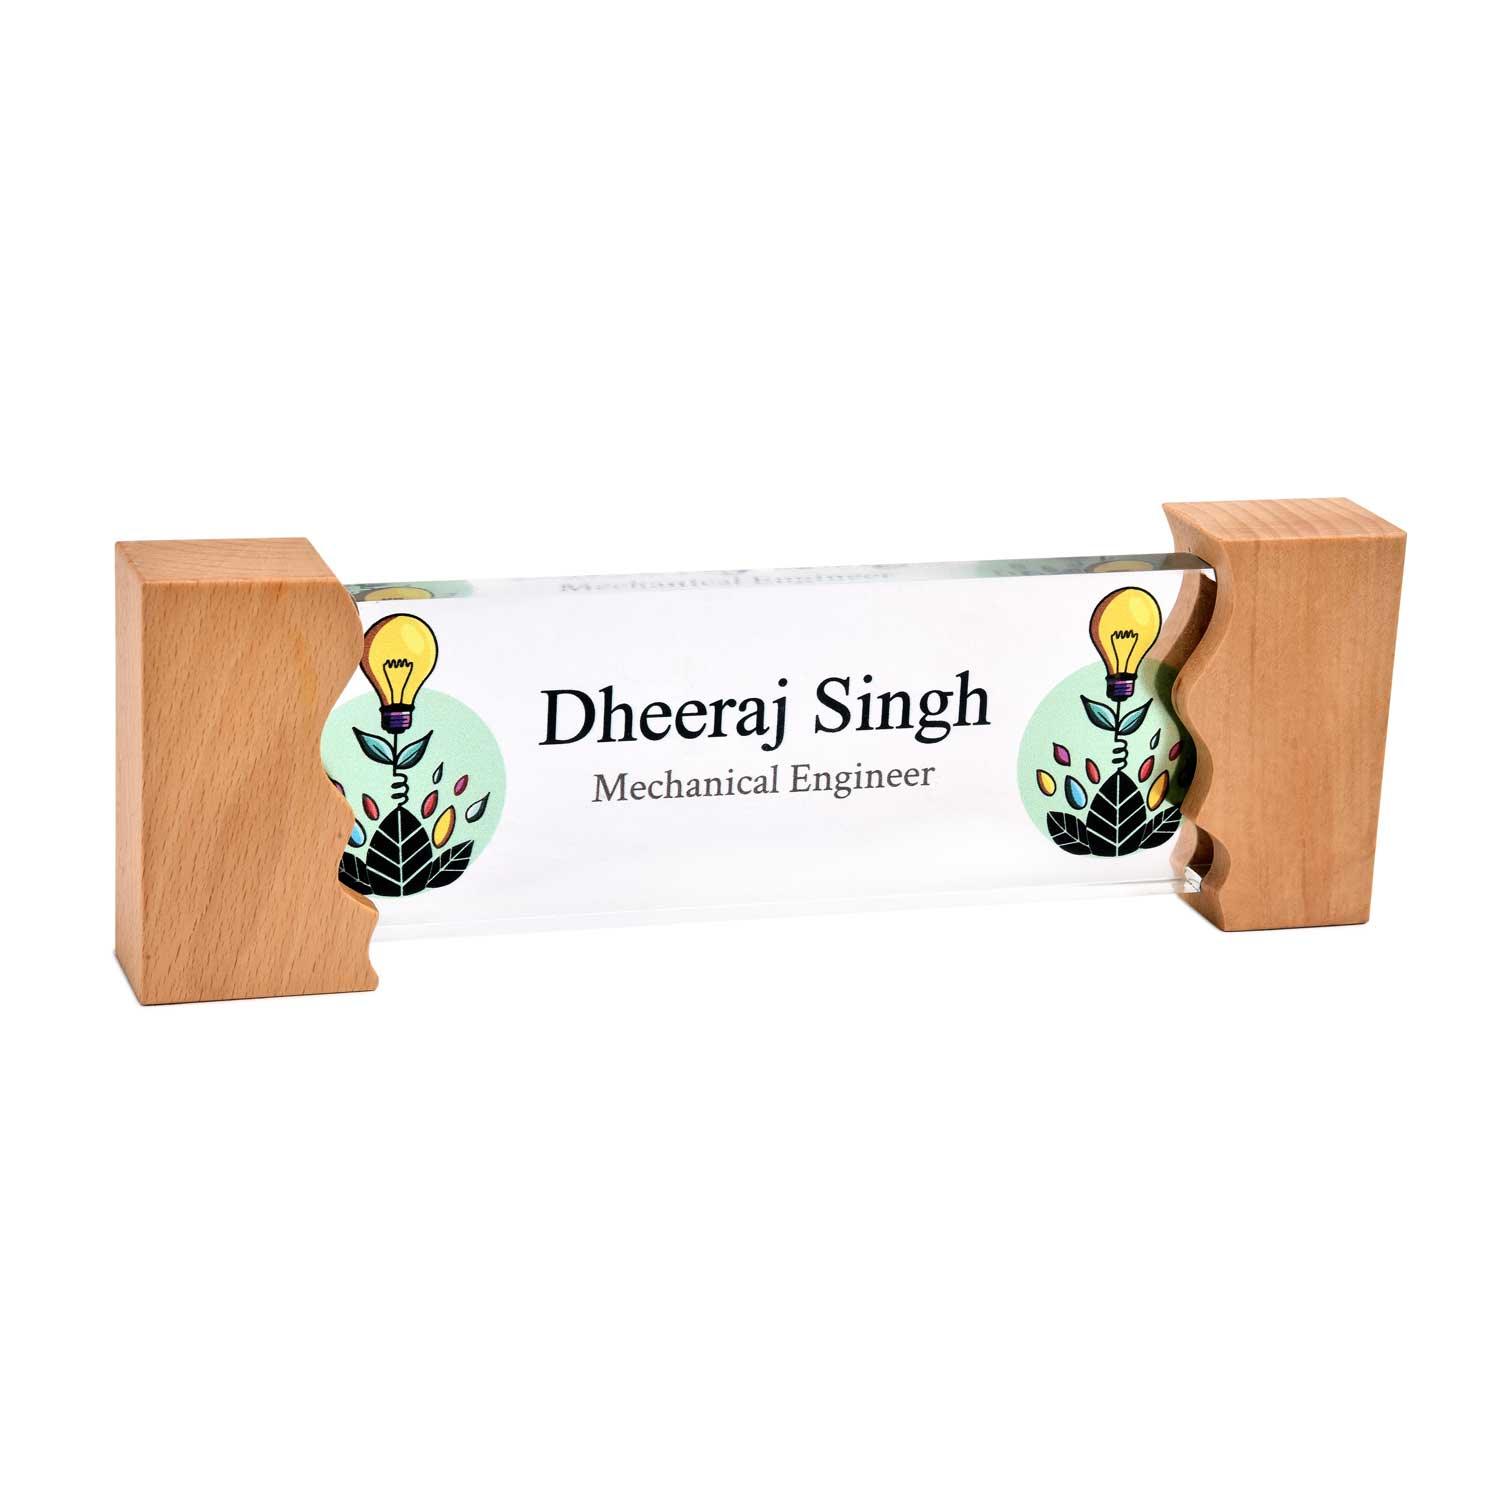 Greenlight Desk Name Plate with Wooden Stand - Housenama